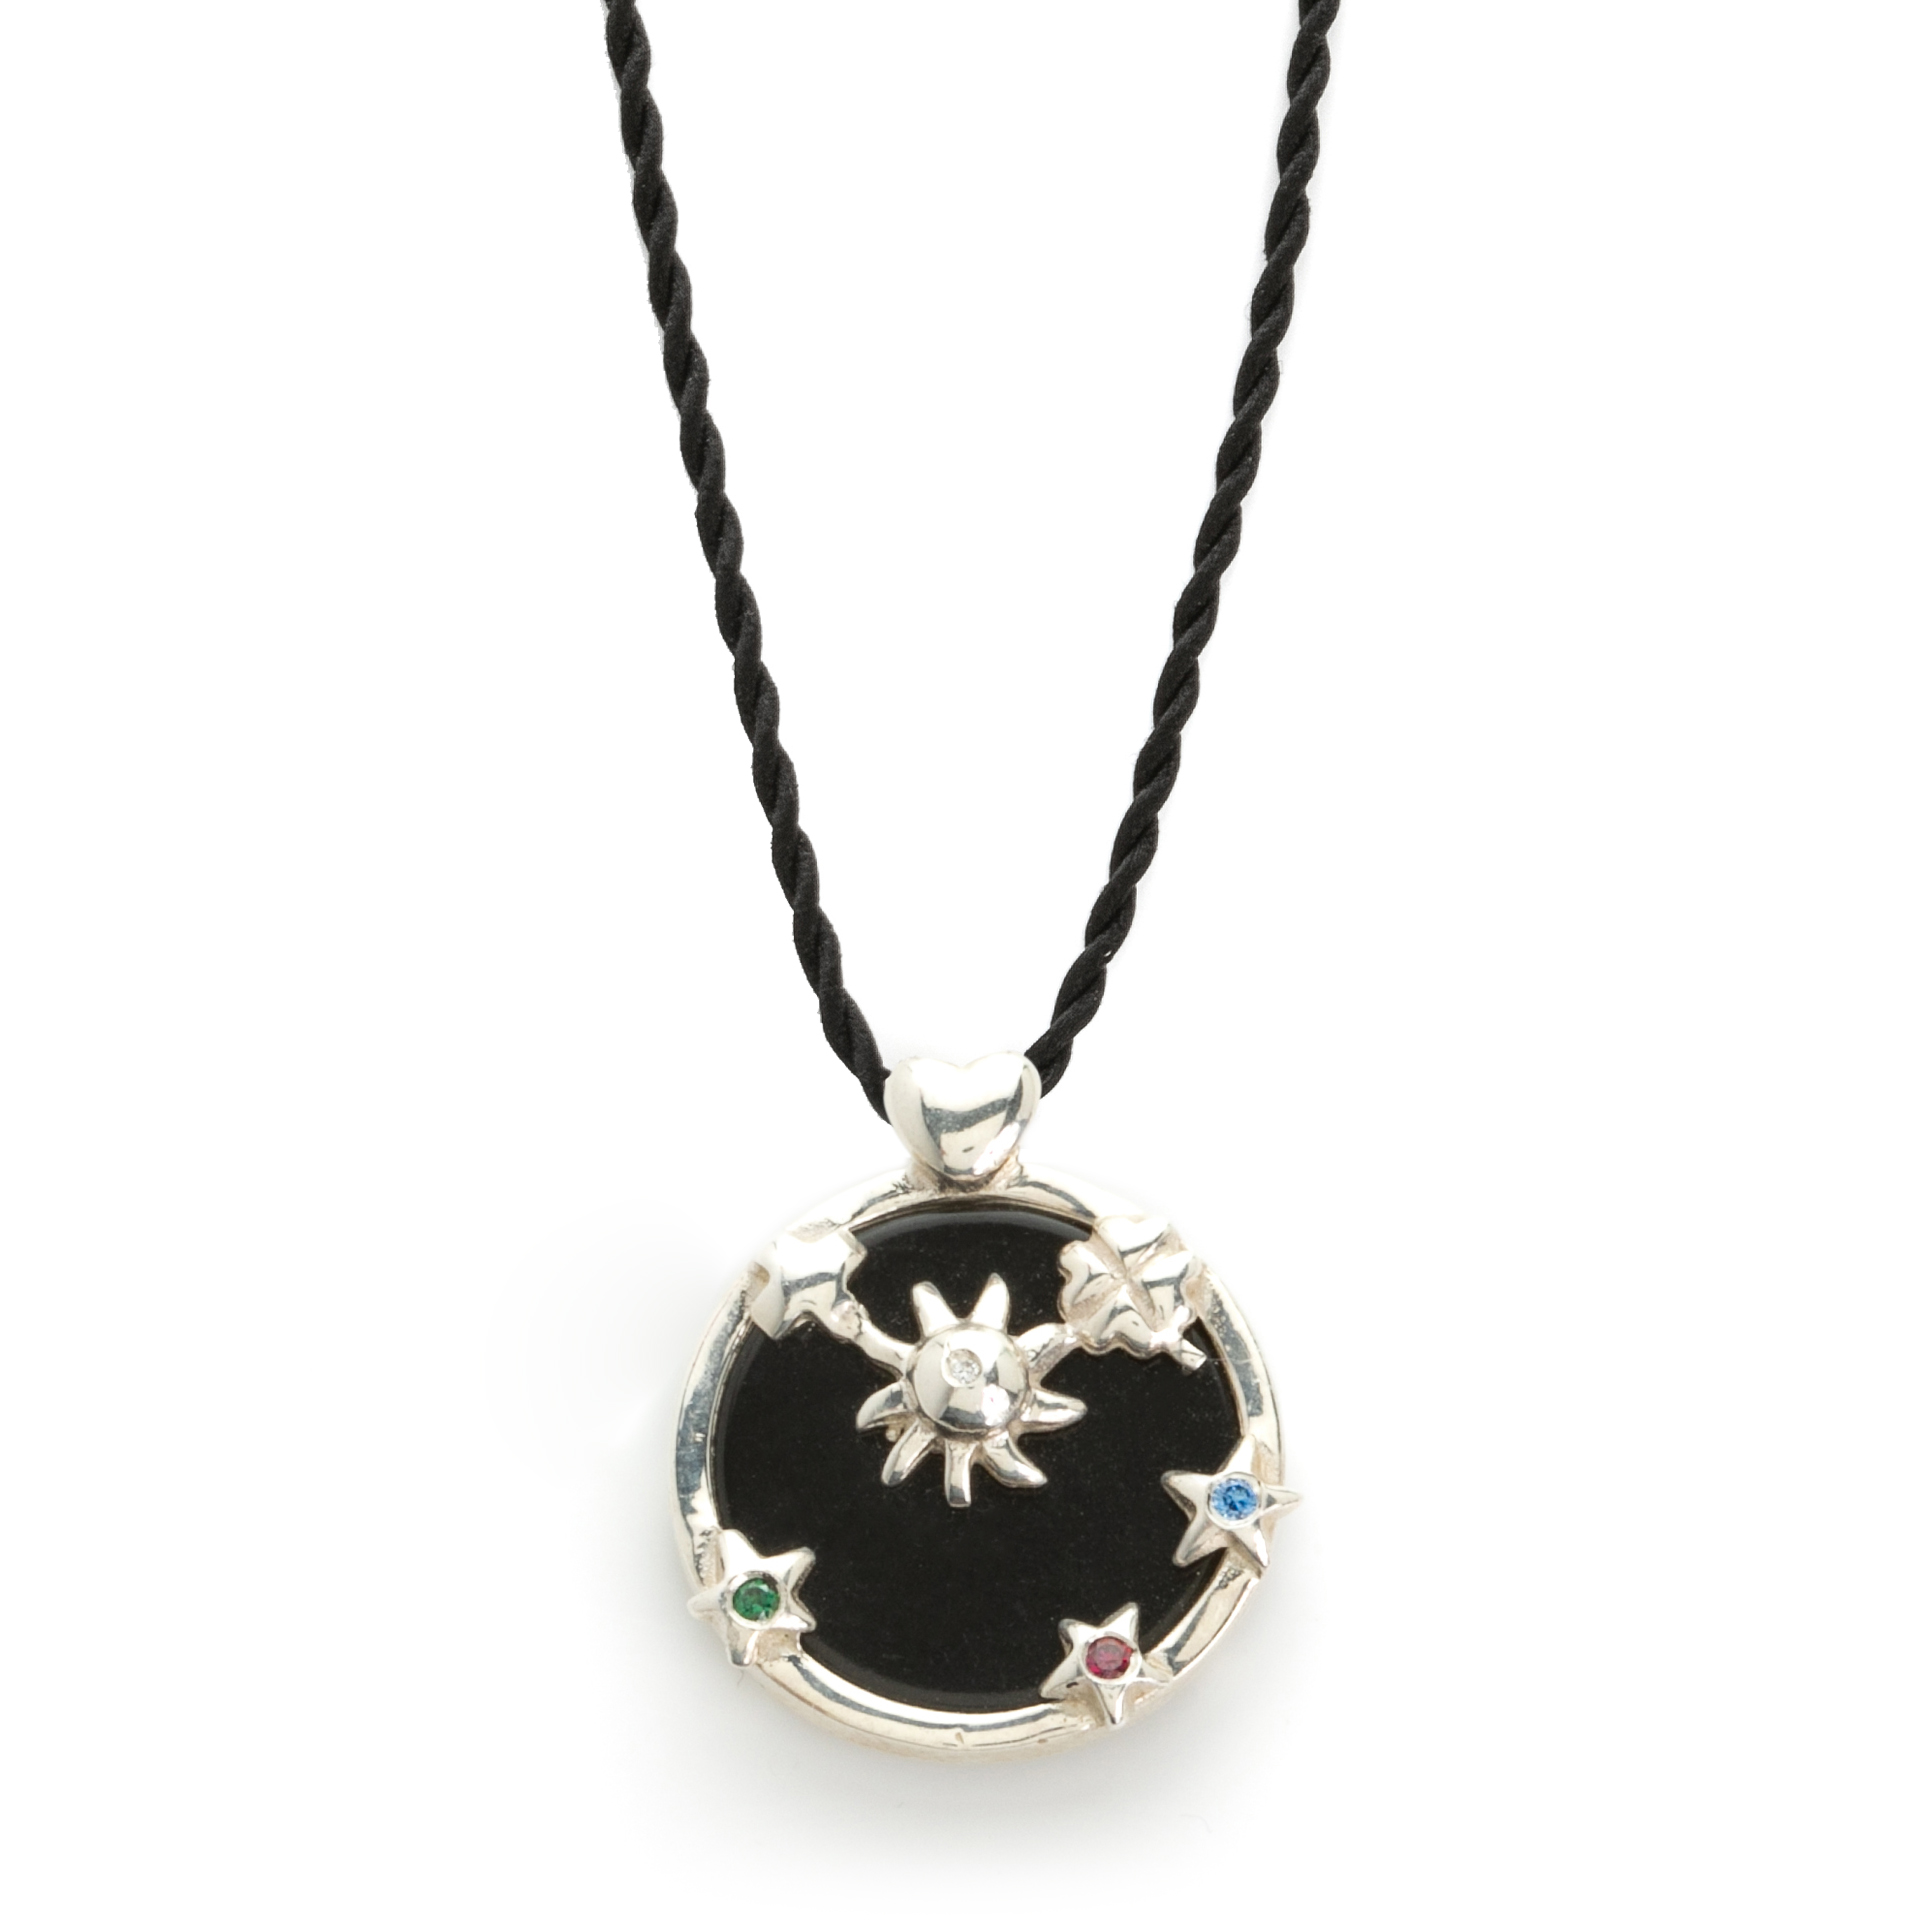 Wishing Skies-Silver pendant with onyx (string)